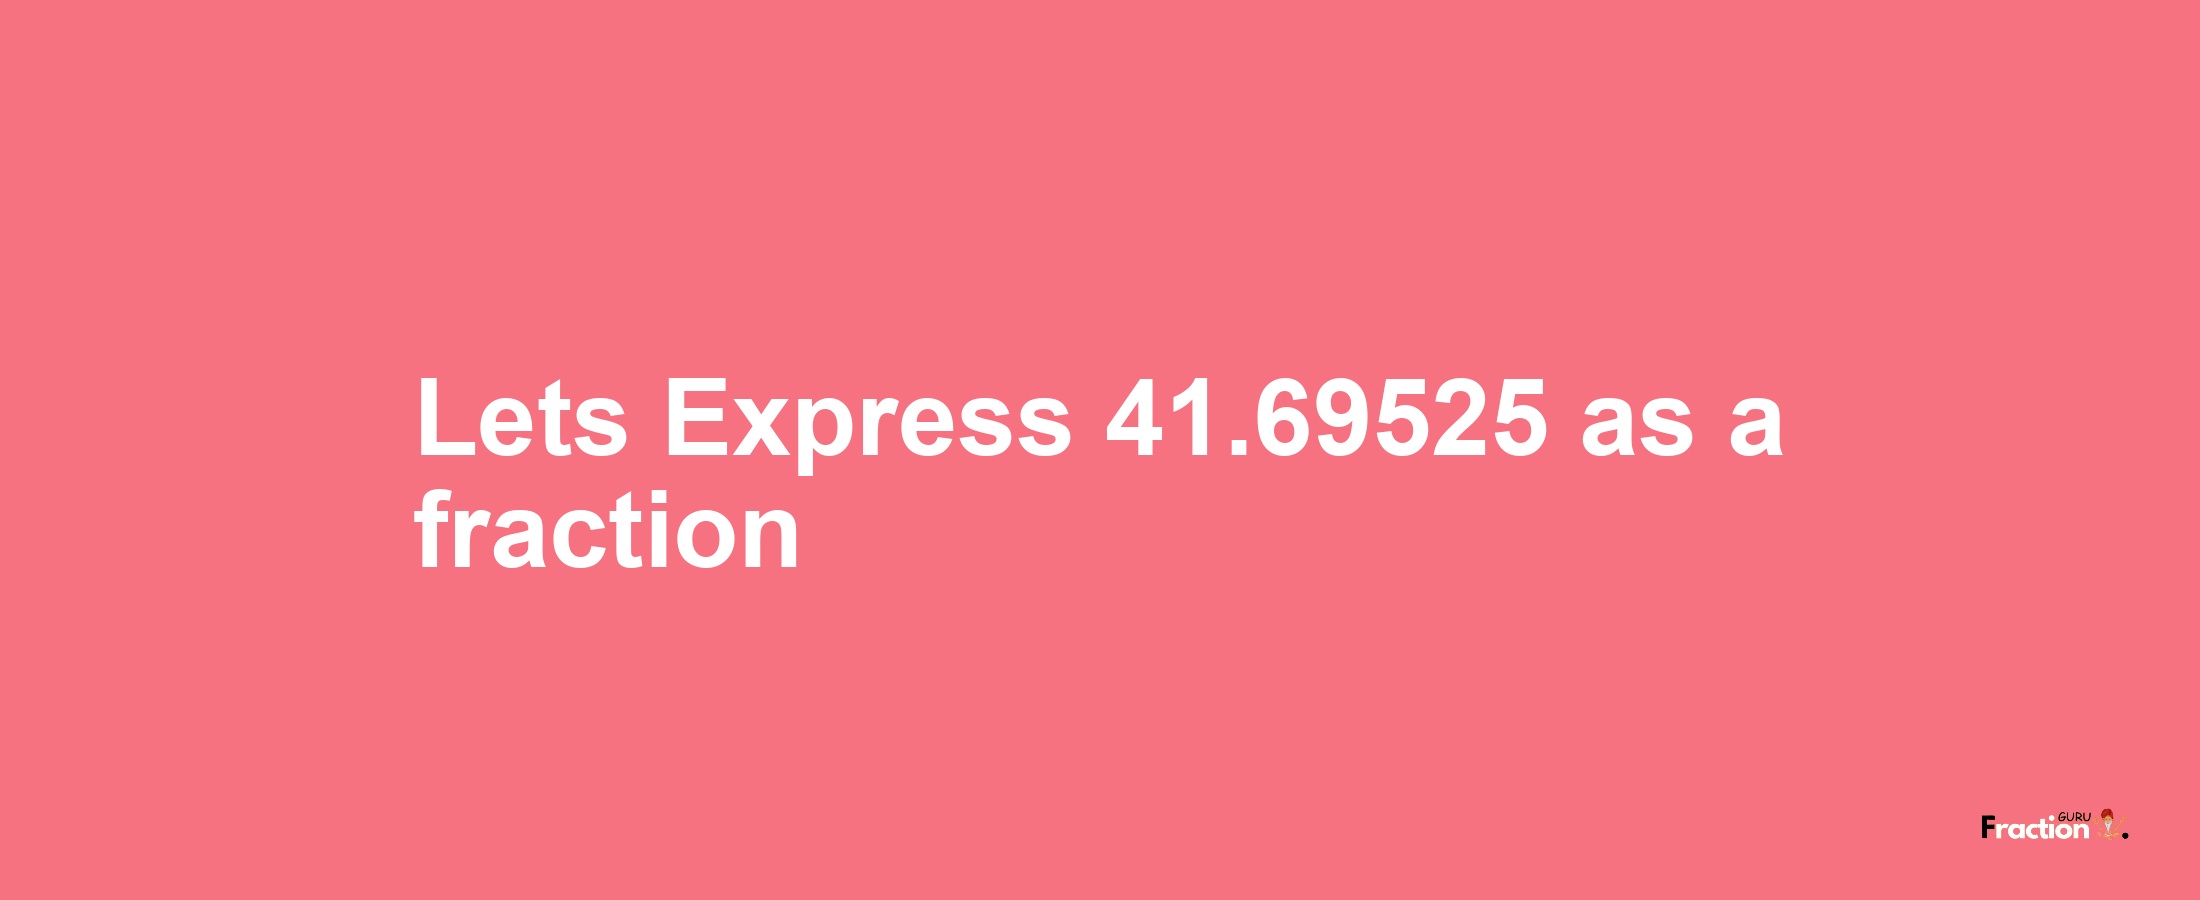 Lets Express 41.69525 as afraction